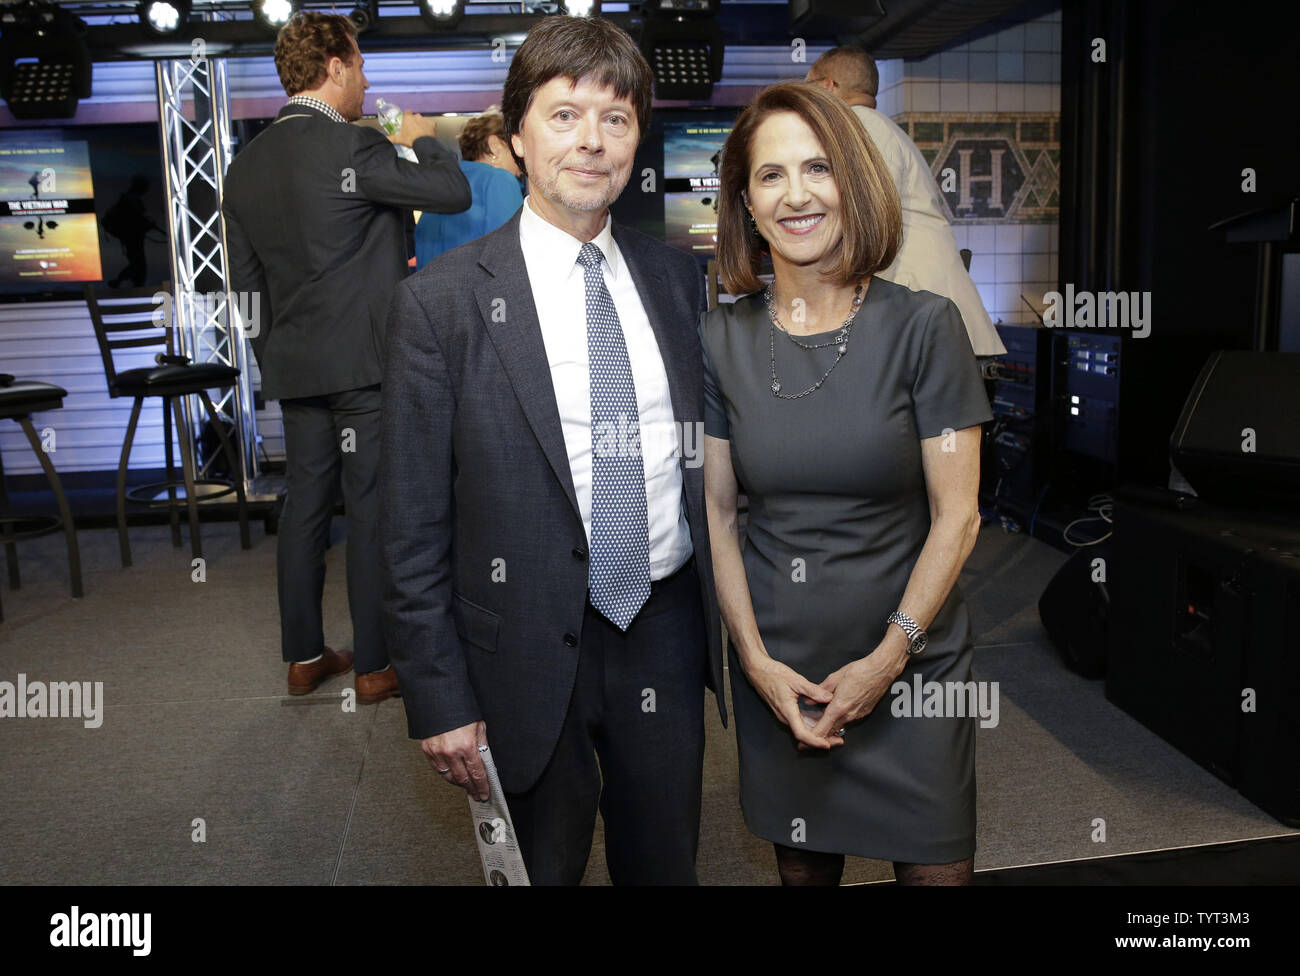 Co-Directors Ken Burns and Lynn Novick arrive with Vietnam War veterans to speak about the upcoming documentary 'THE VIETNAM WAR' at CBS Radio in New York City on September 14, 2017. Ken Burns and Lynn Novick, co-directed, 'THE VIETNAM WAR' which is an immersive narrative in which Burns and Novick tell the epic story of the war as it has never before been told on film. THE VIETNAM WAR features testimony from nearly 80 witnesses, including many Americans who fought in the war and others who opposed it, as well as Vietnamese combatants and civilians from both the winning and losing sides. The ne Stock Photo